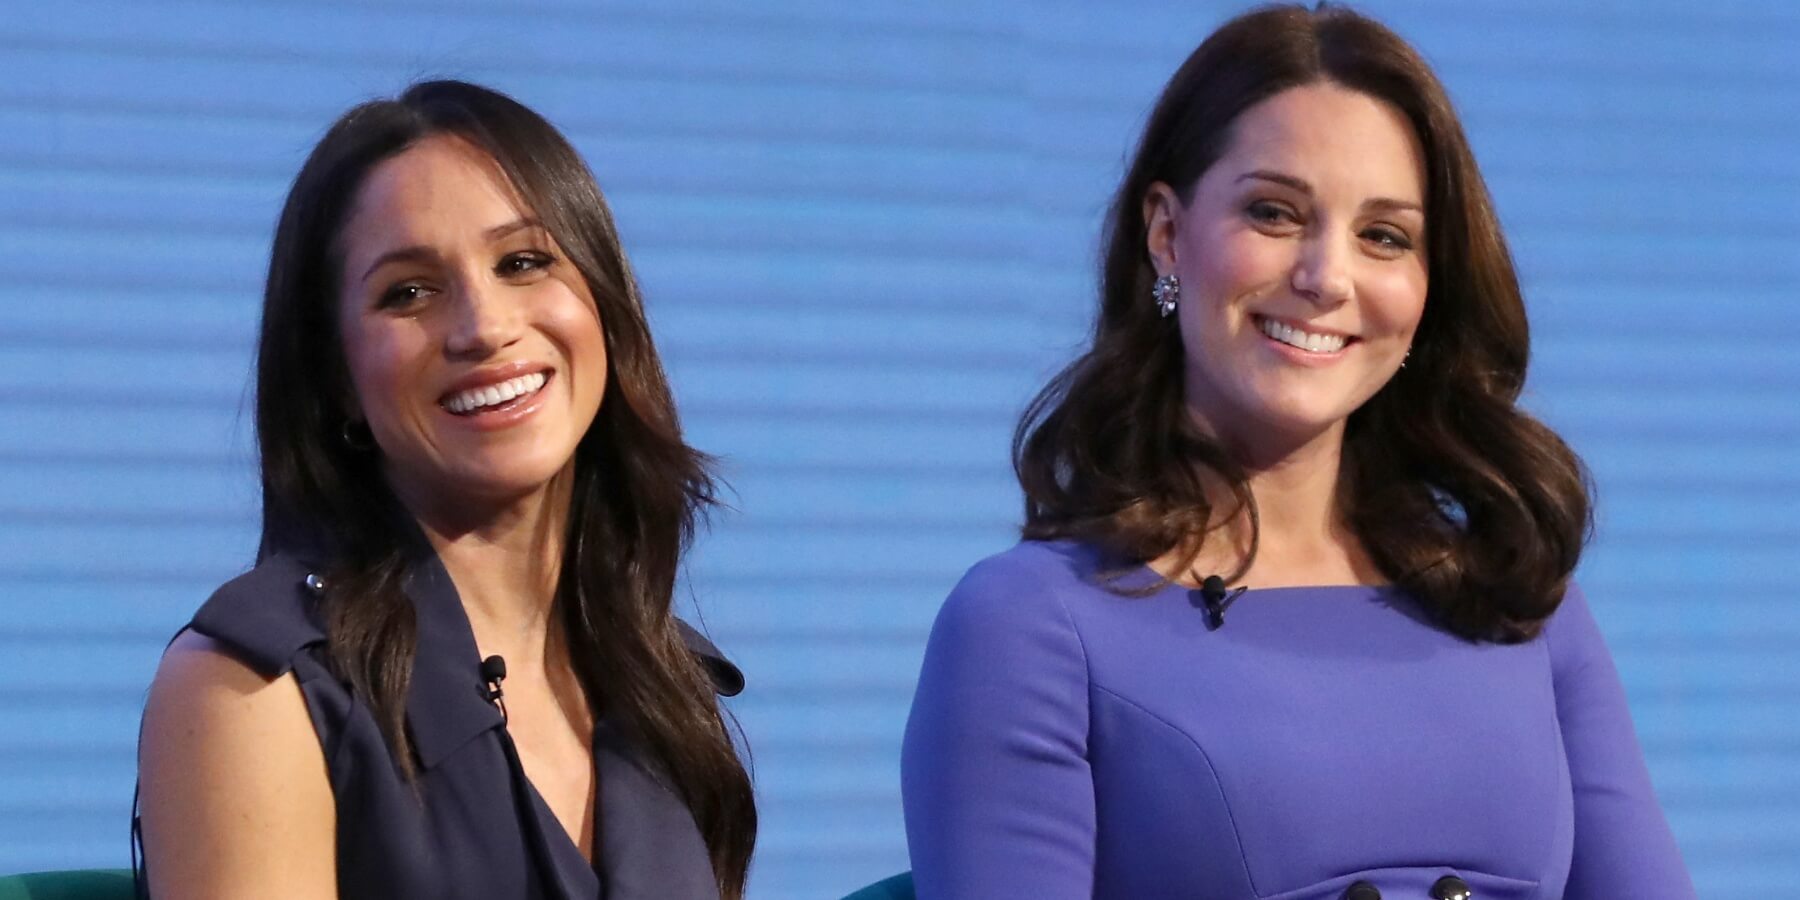 Meghan Markle and Kate Middleton at the first annual Royal Foundation Forum on February 28, 2018 in London.